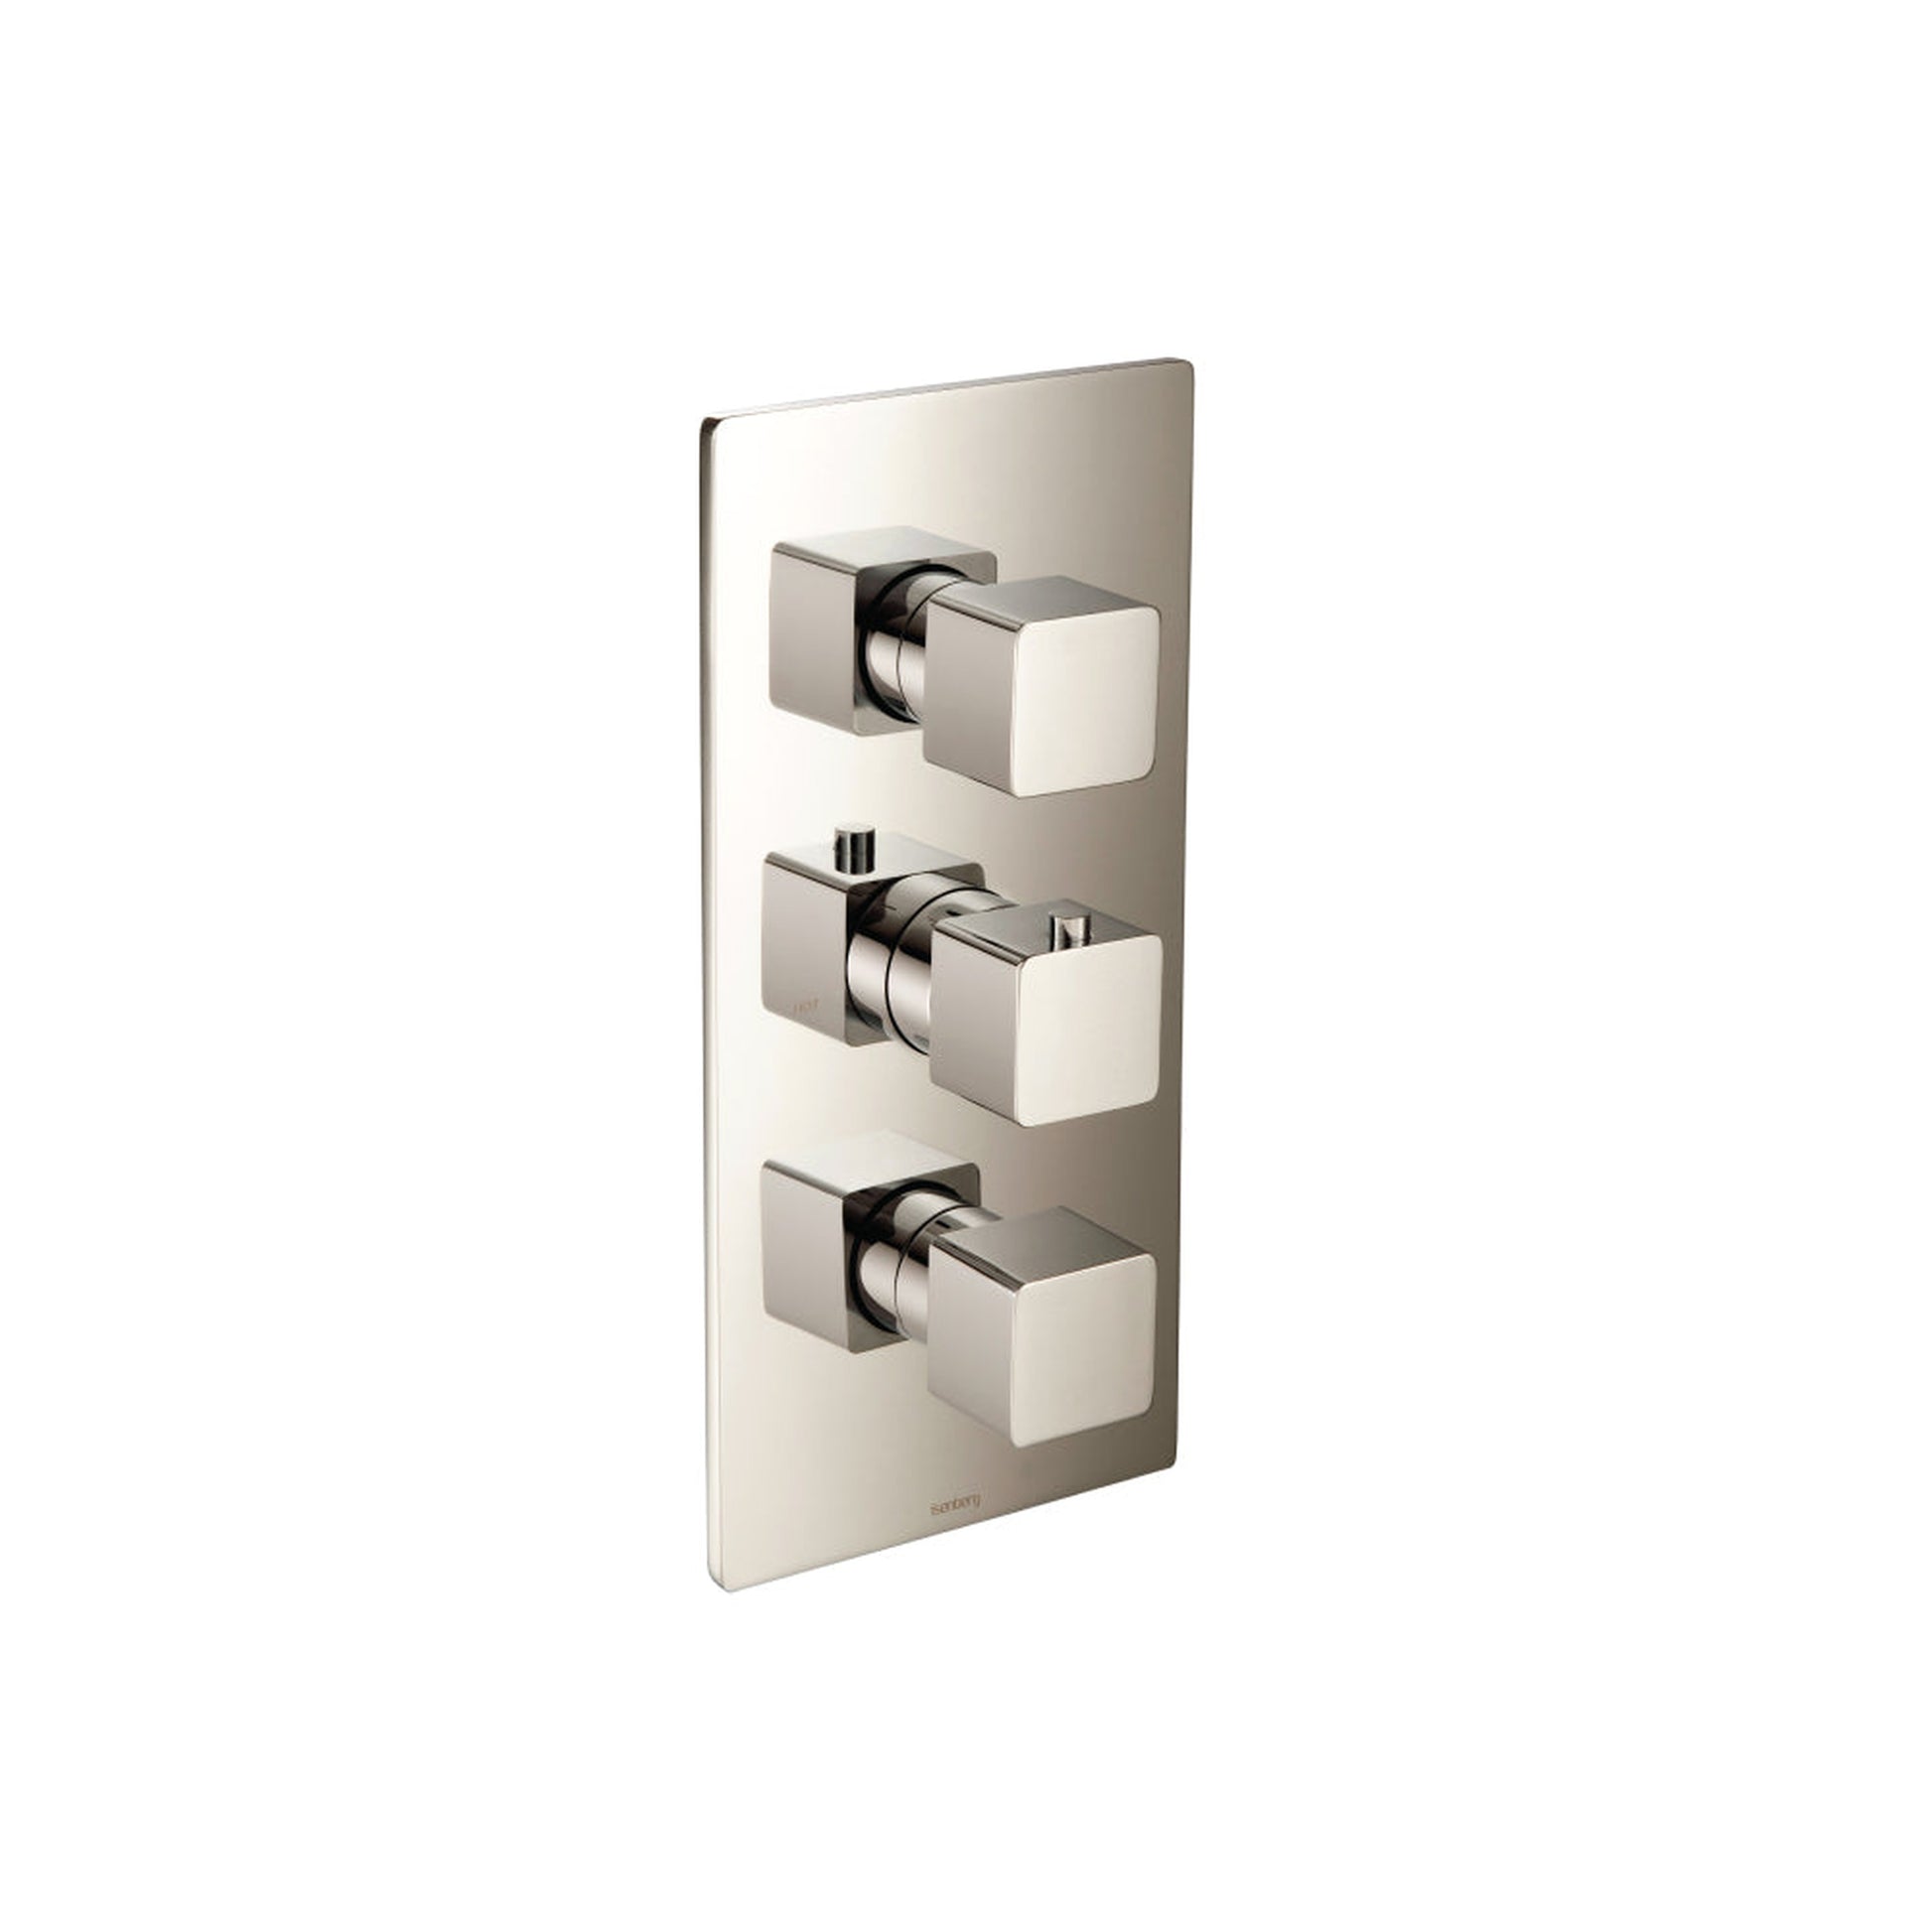 Isenberg Serie 196 3/4" Two Output Thermostatic Valve and Trim in Polished Nickel